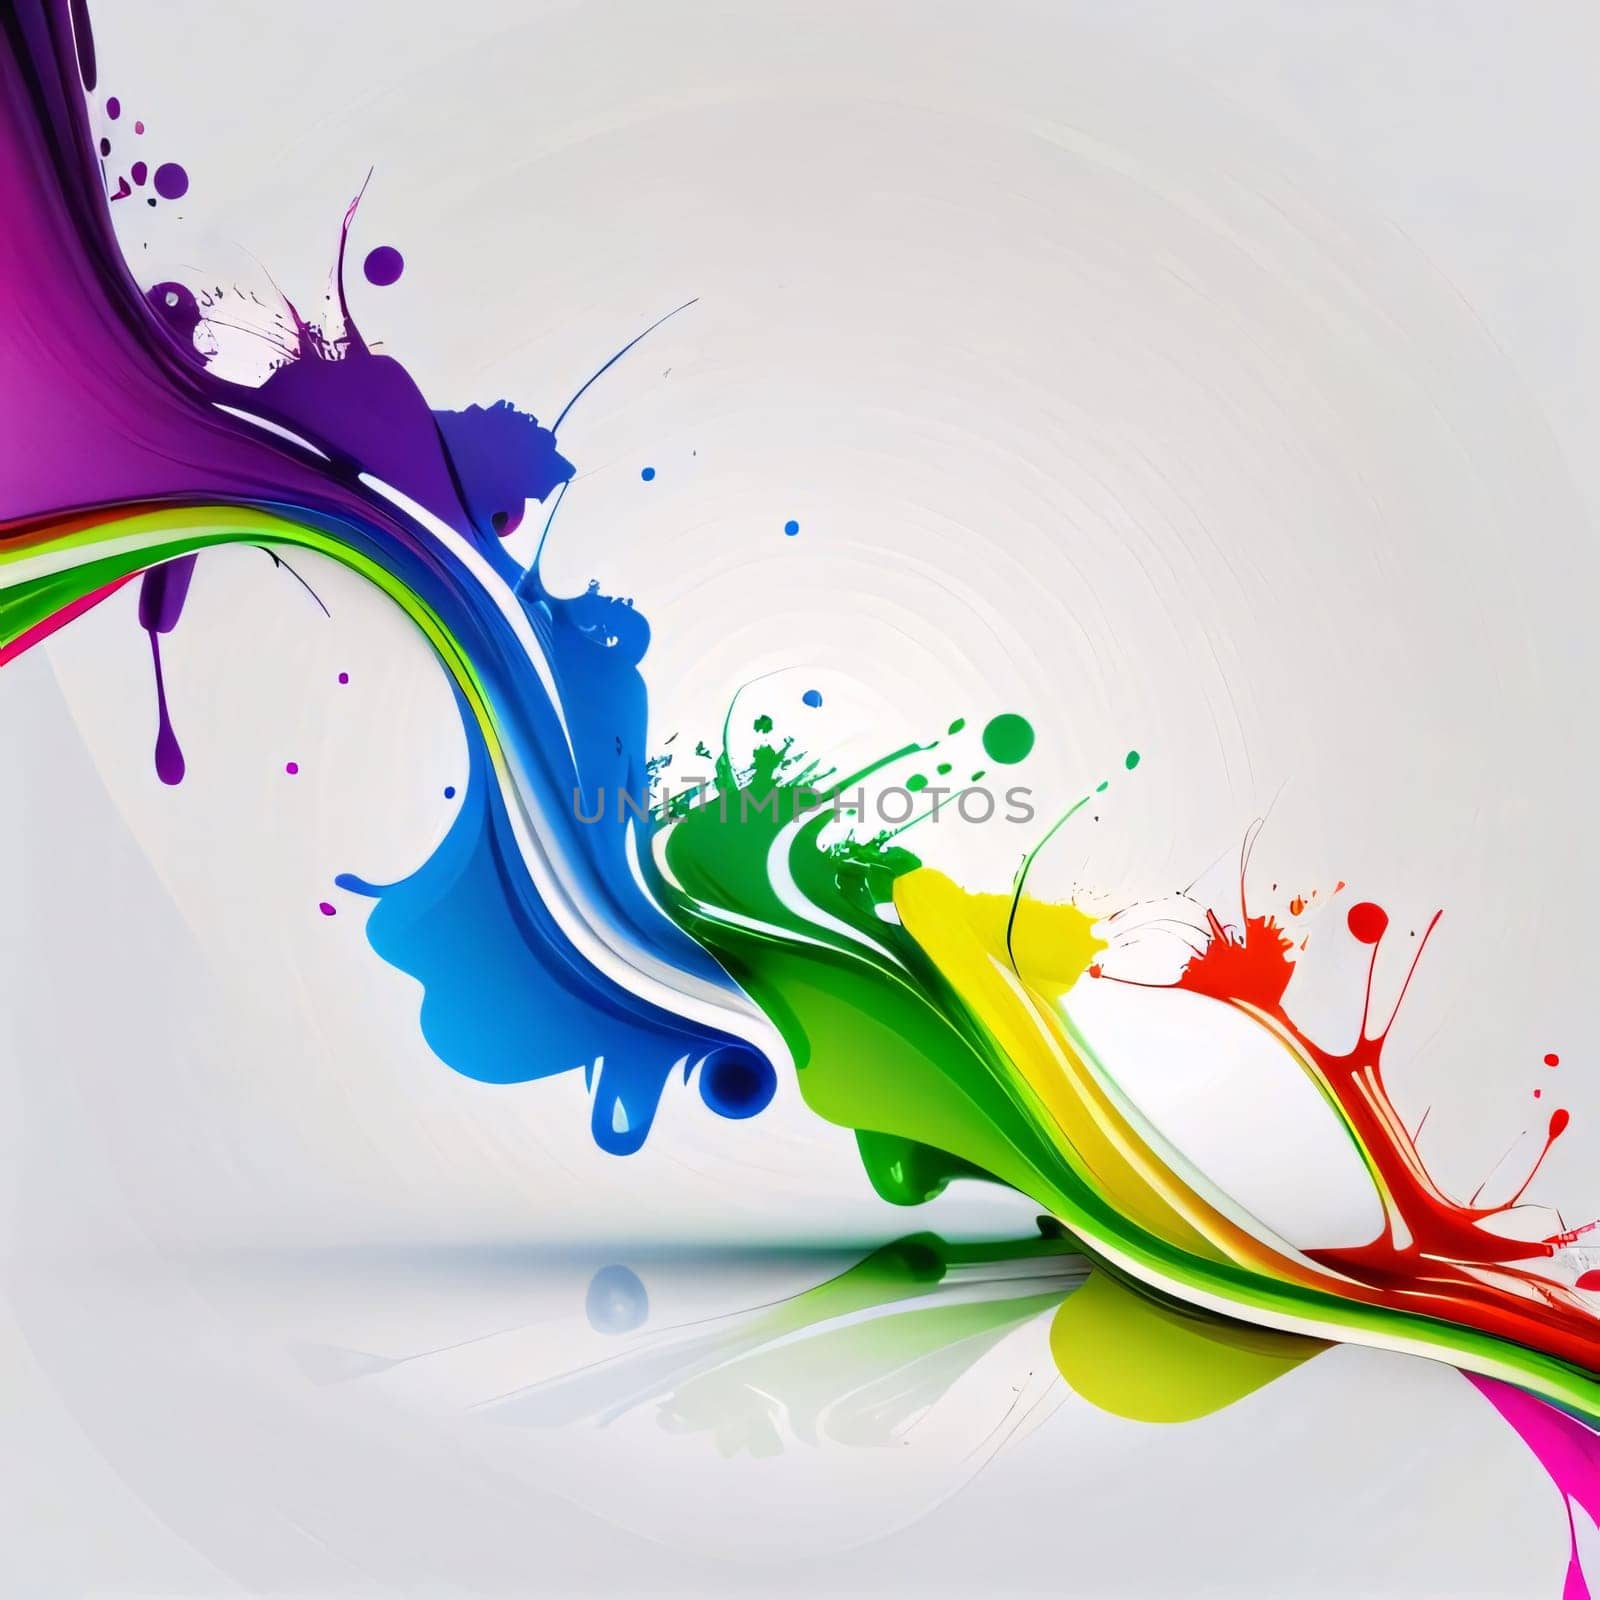 Abstract background design: abstract colorful background with paint splashes. vector illustration eps10